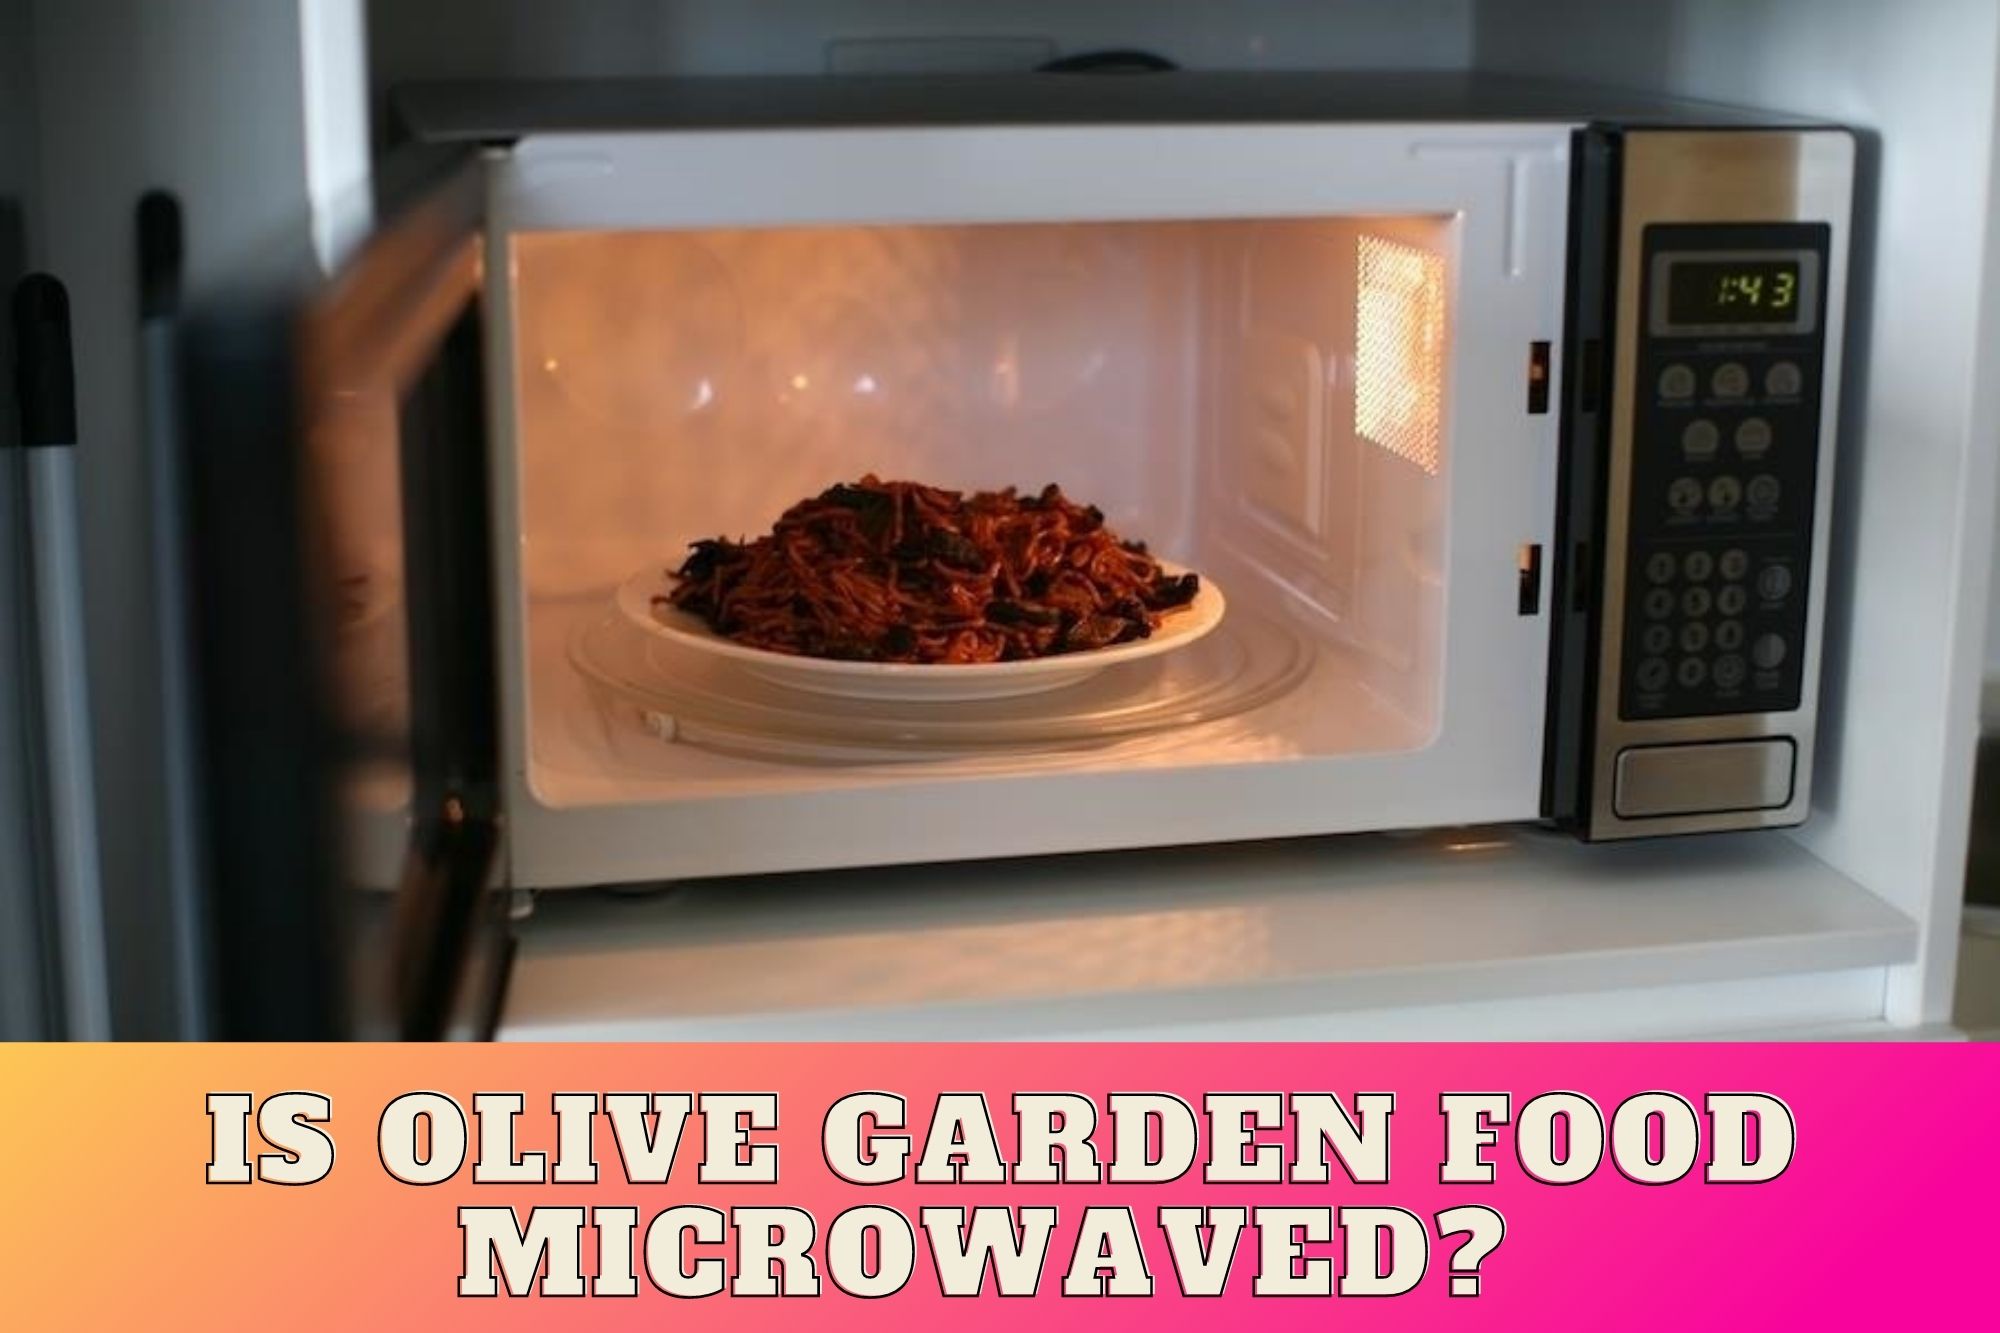 Is Olive Garden Food Microwaved?